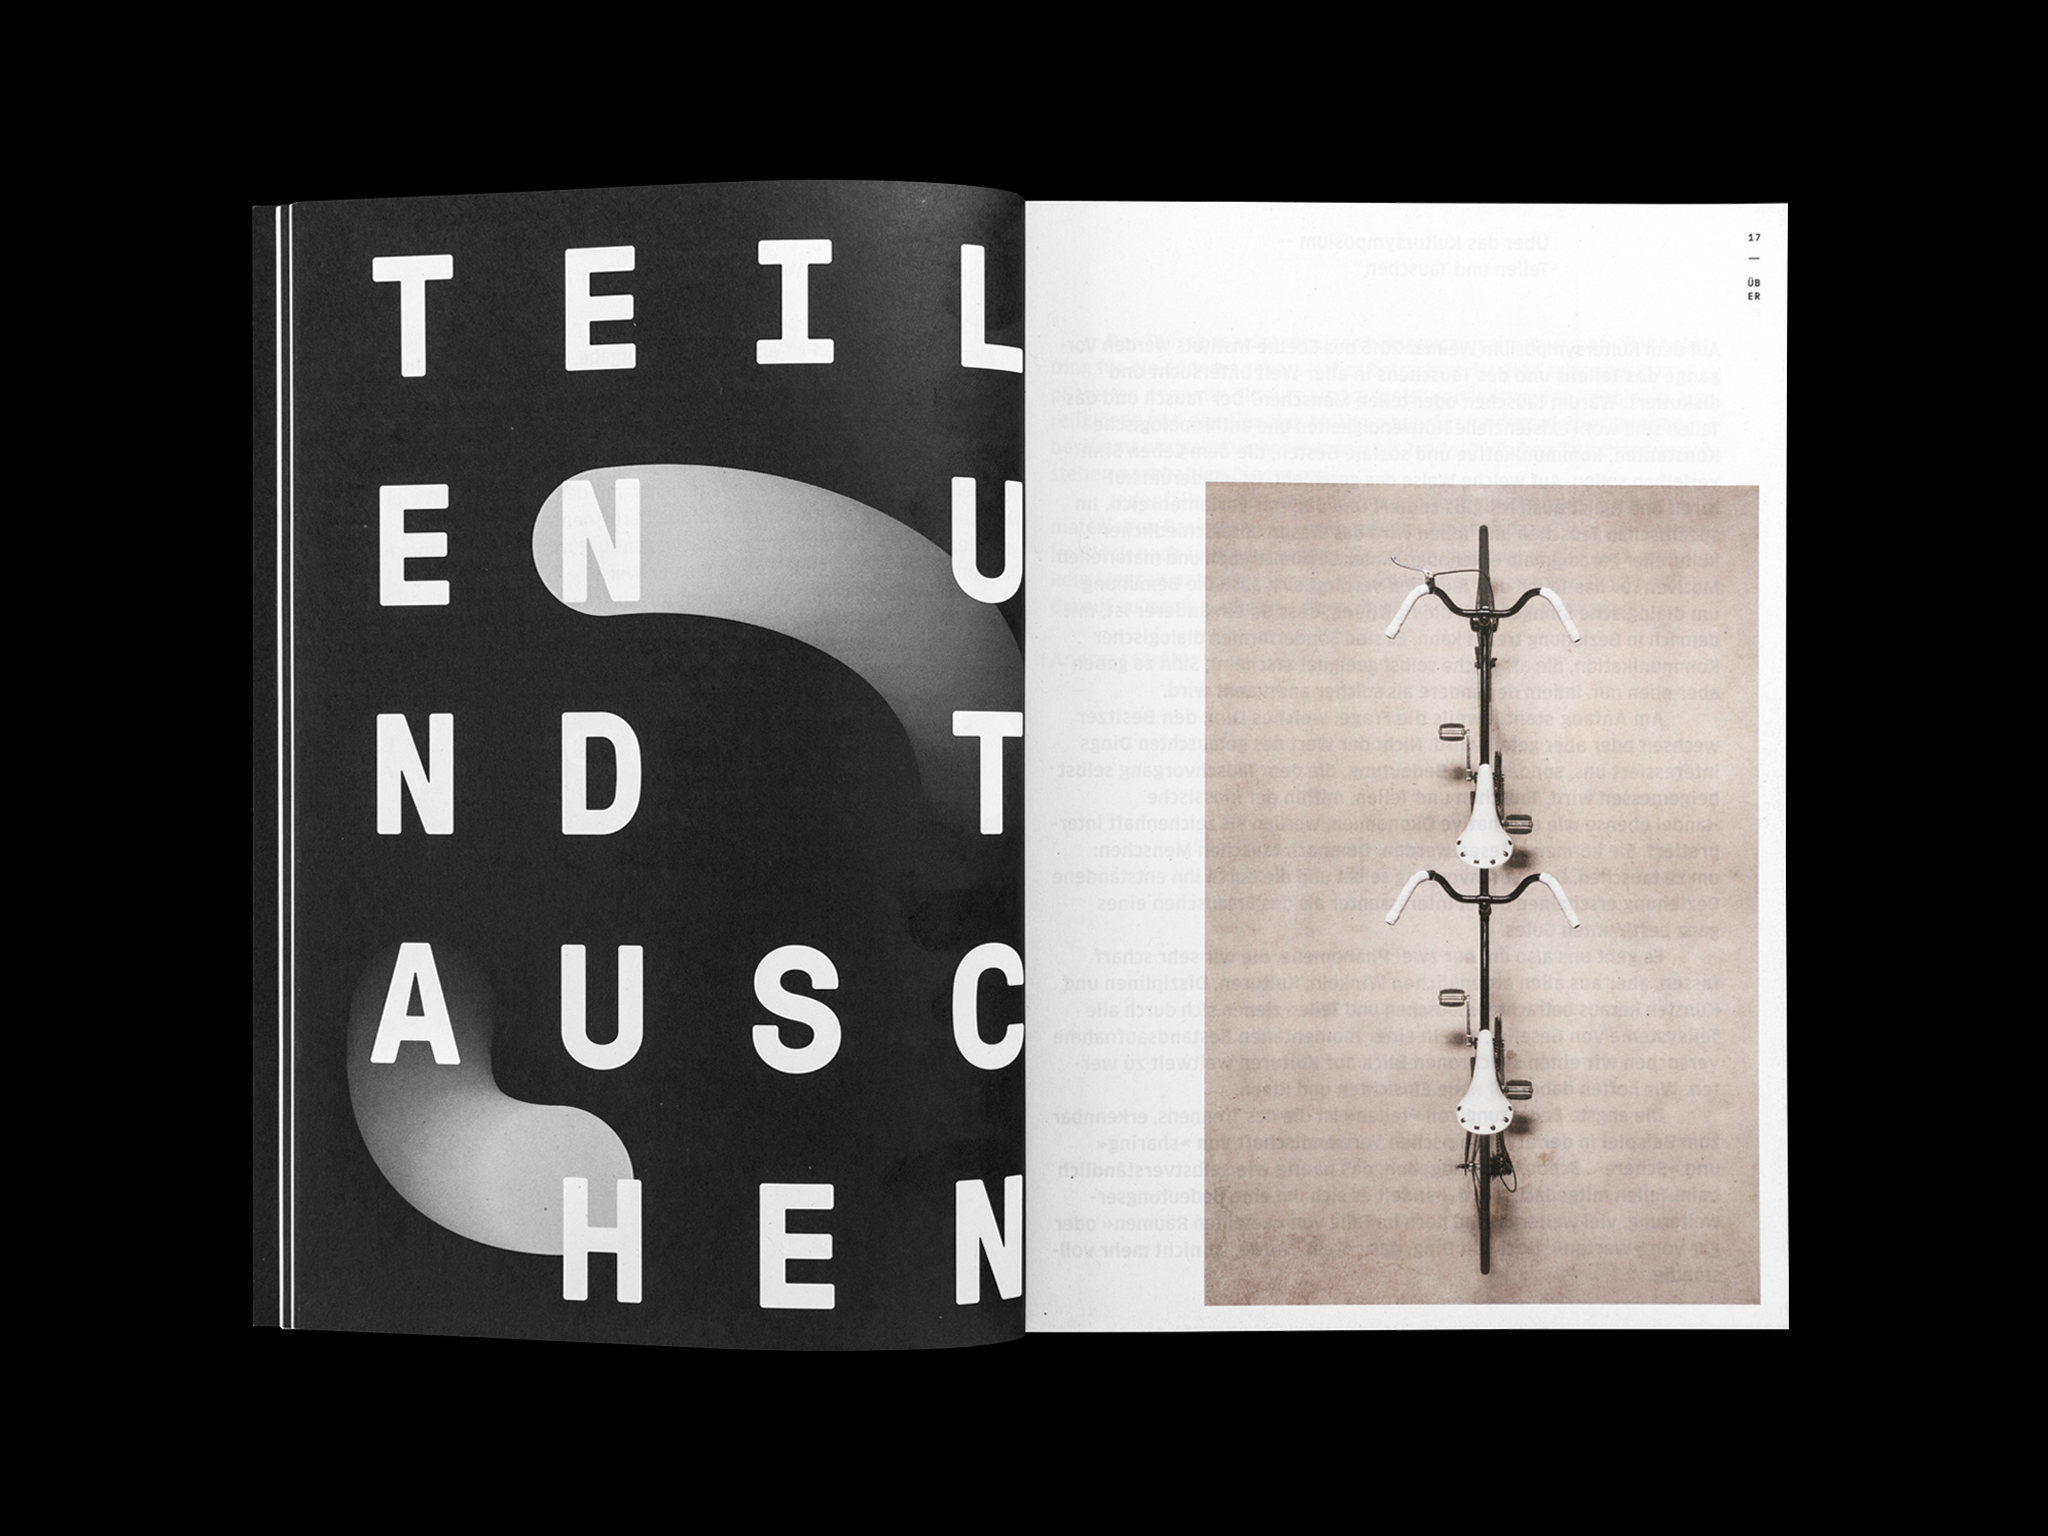 Doppelseite eines Kataloges mit Typografie und Zweirad-Fotografie / Double page of catalog with typography and two-wheel photography